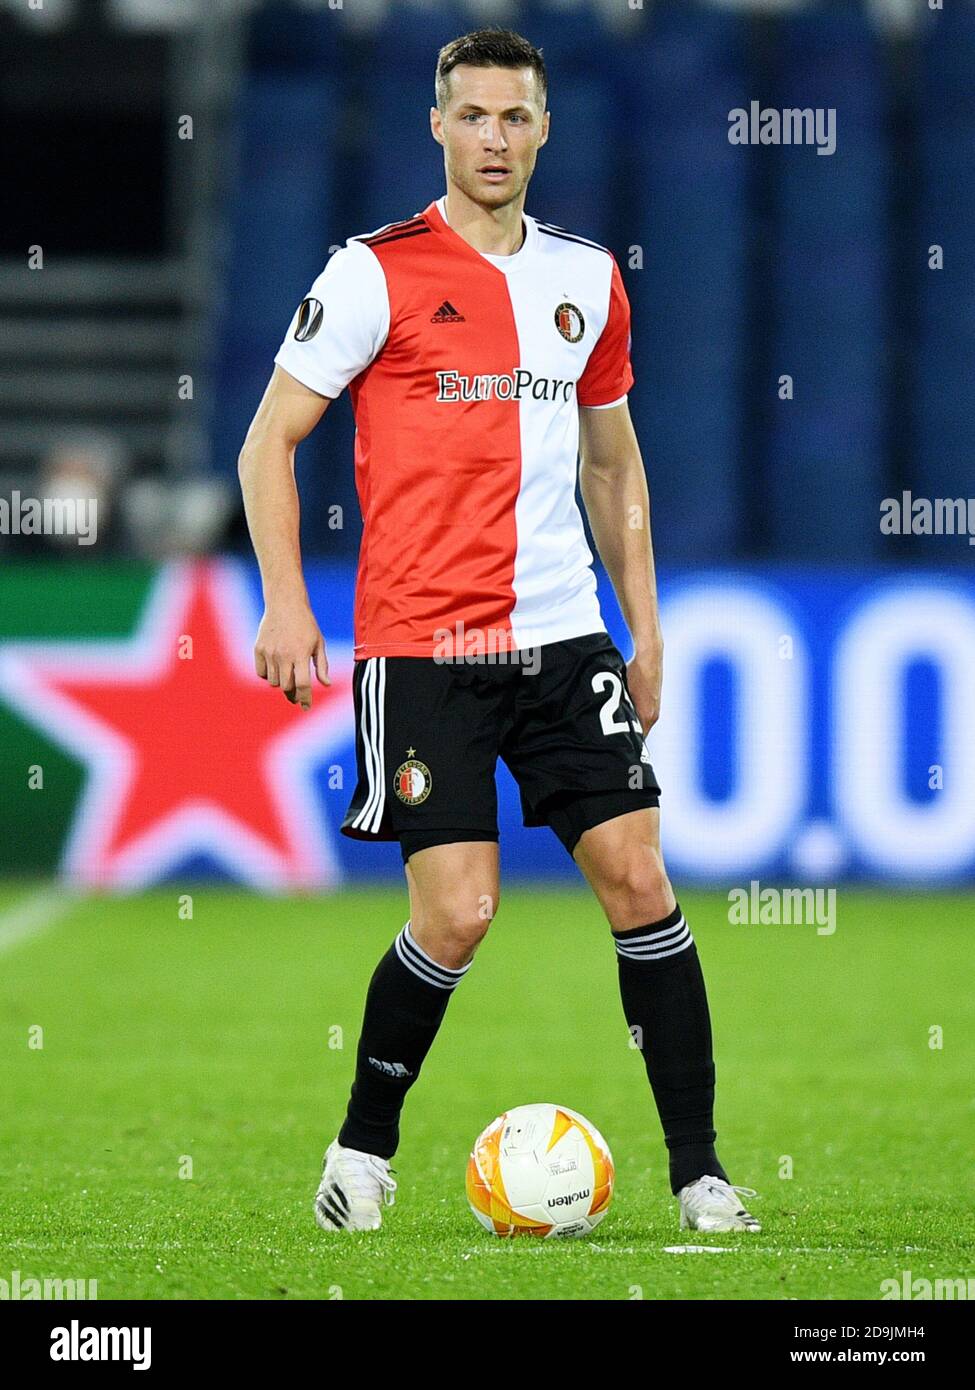 Rotterdam, The Netherlands. 5th Nov, 2020. Uros Spajic of Feyenoord during the UEFA Europa League, Group Stage, Group K football match between Feyenoord and CSKA Moskva on november 5, 2020 at De Kuip stadium in Rotterdam, The Netherlands - Photo Yannick Verhoeven/Orange Pictures/DPPI/LM Credit: Paola Benini/Alamy Live News Stock Photo